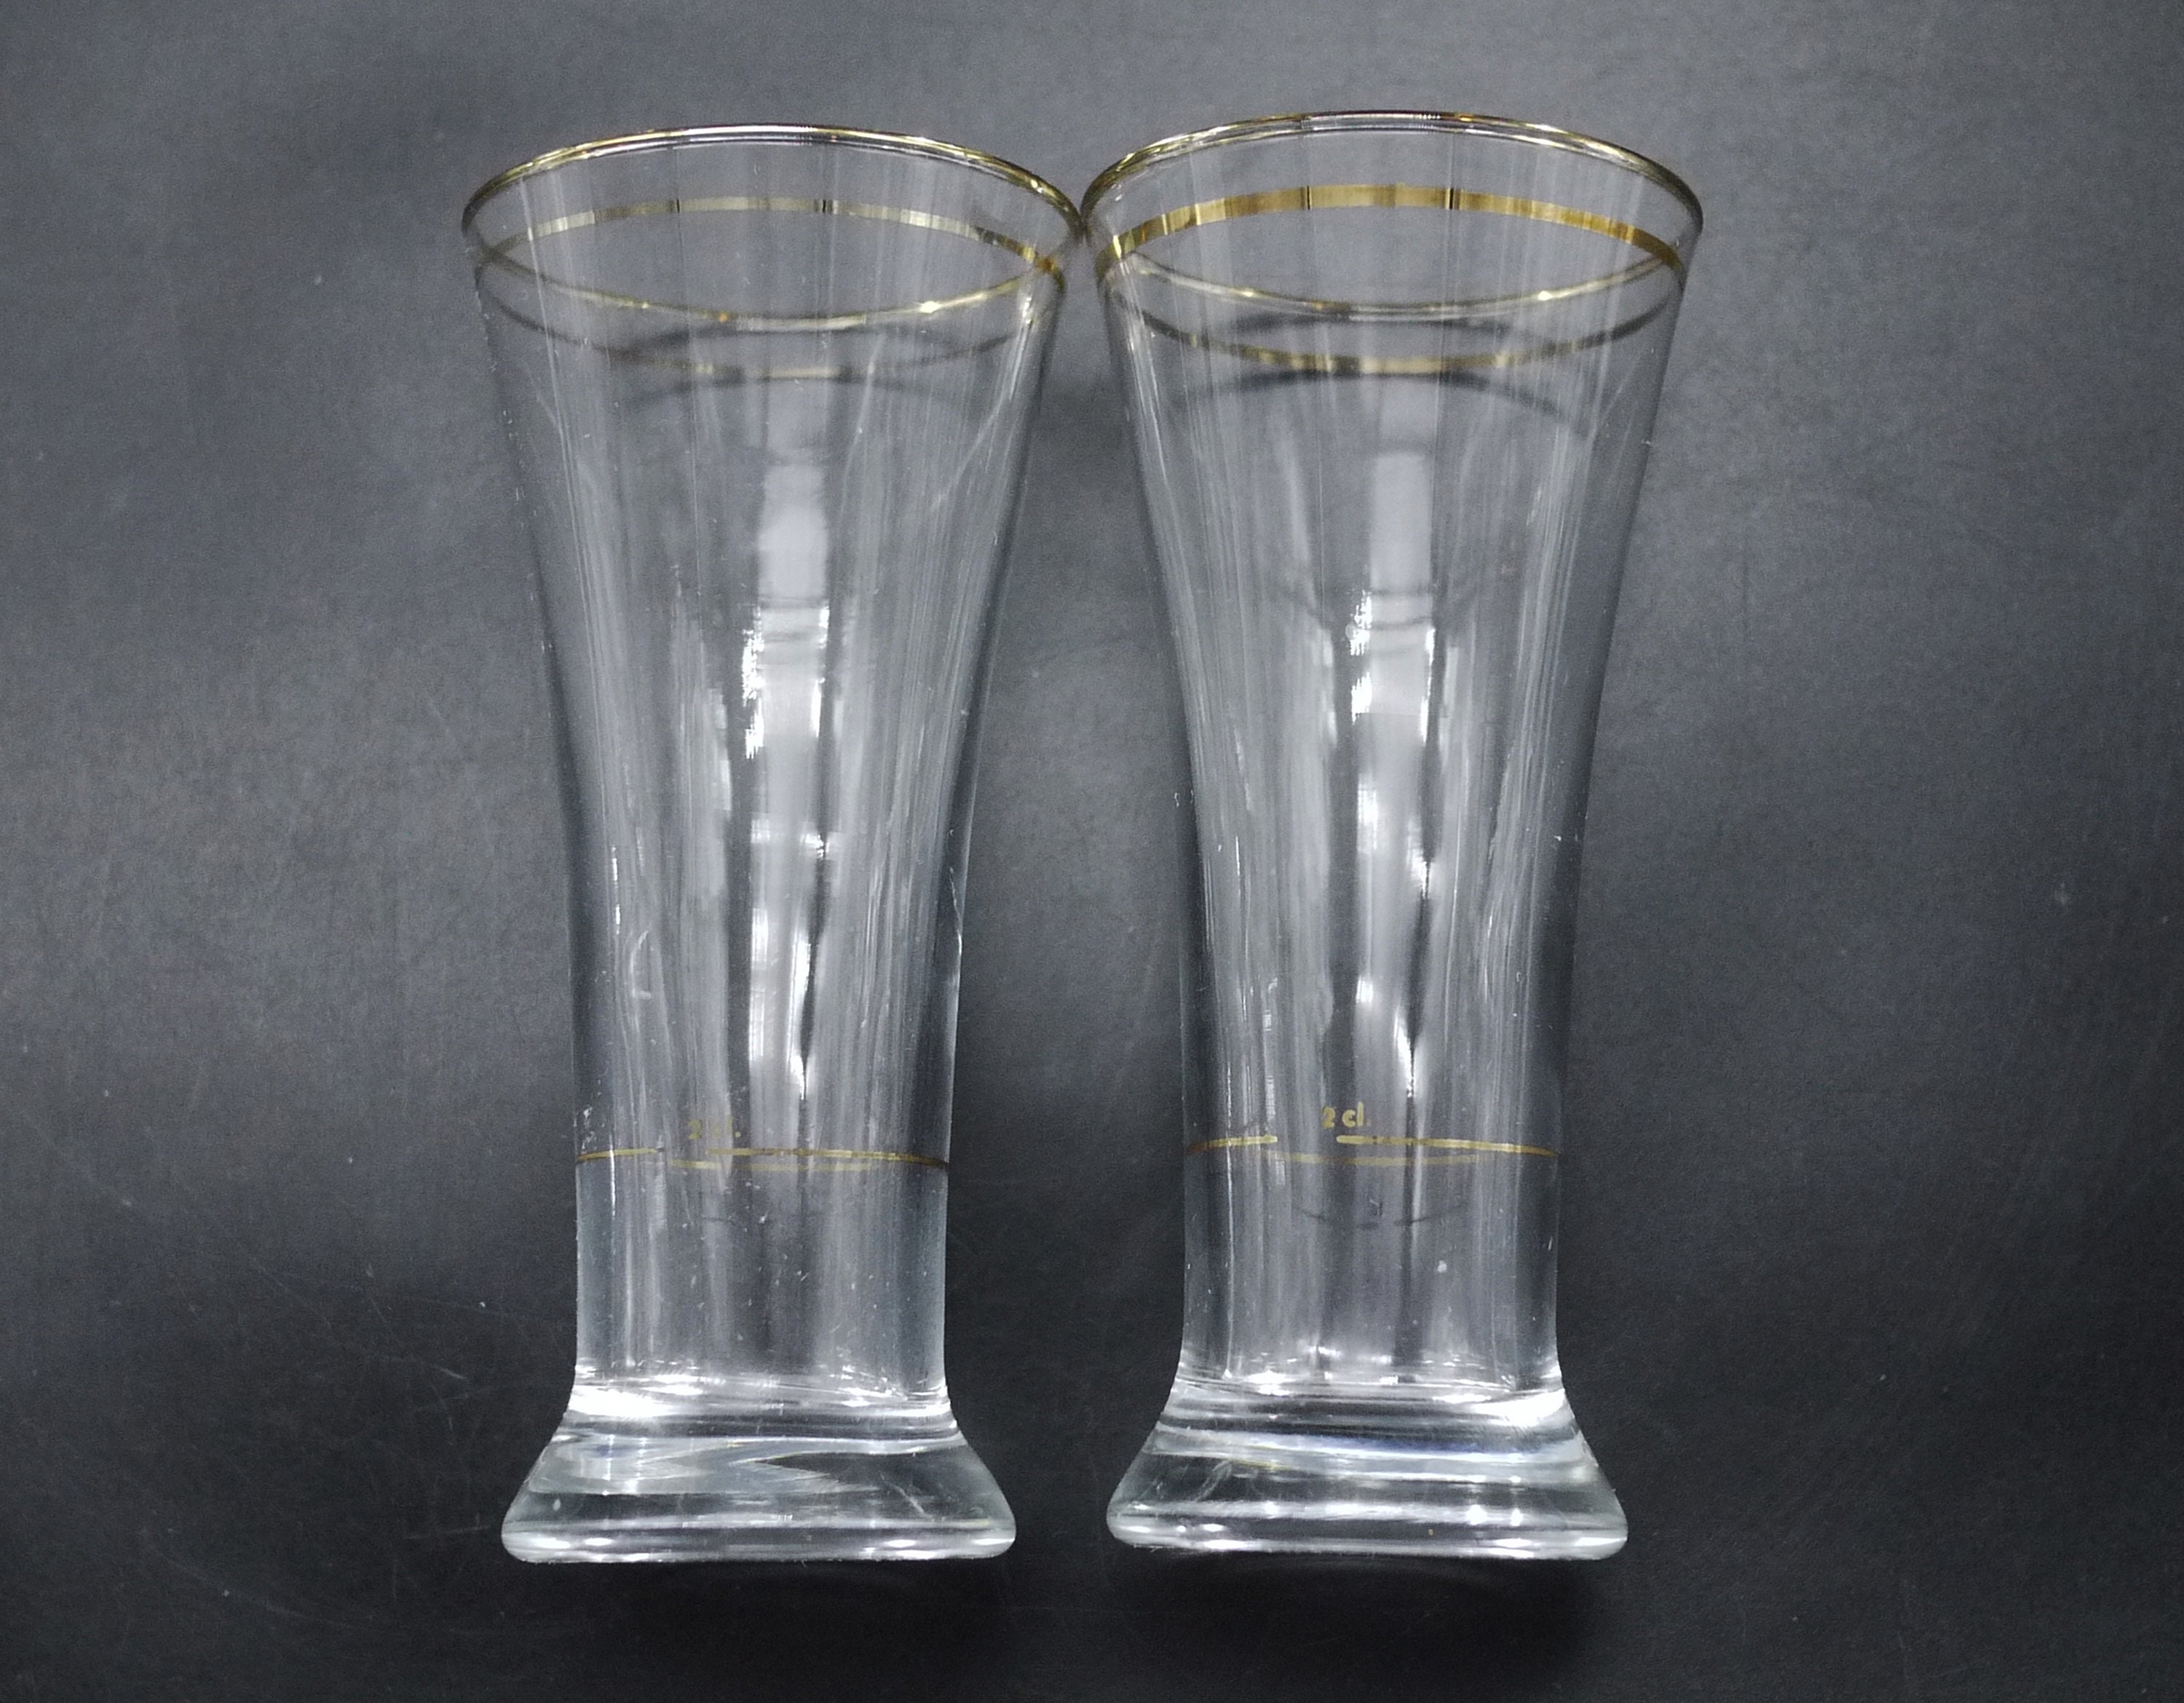 French Art Deco Pastis Glasses With Gold Rim, S/2